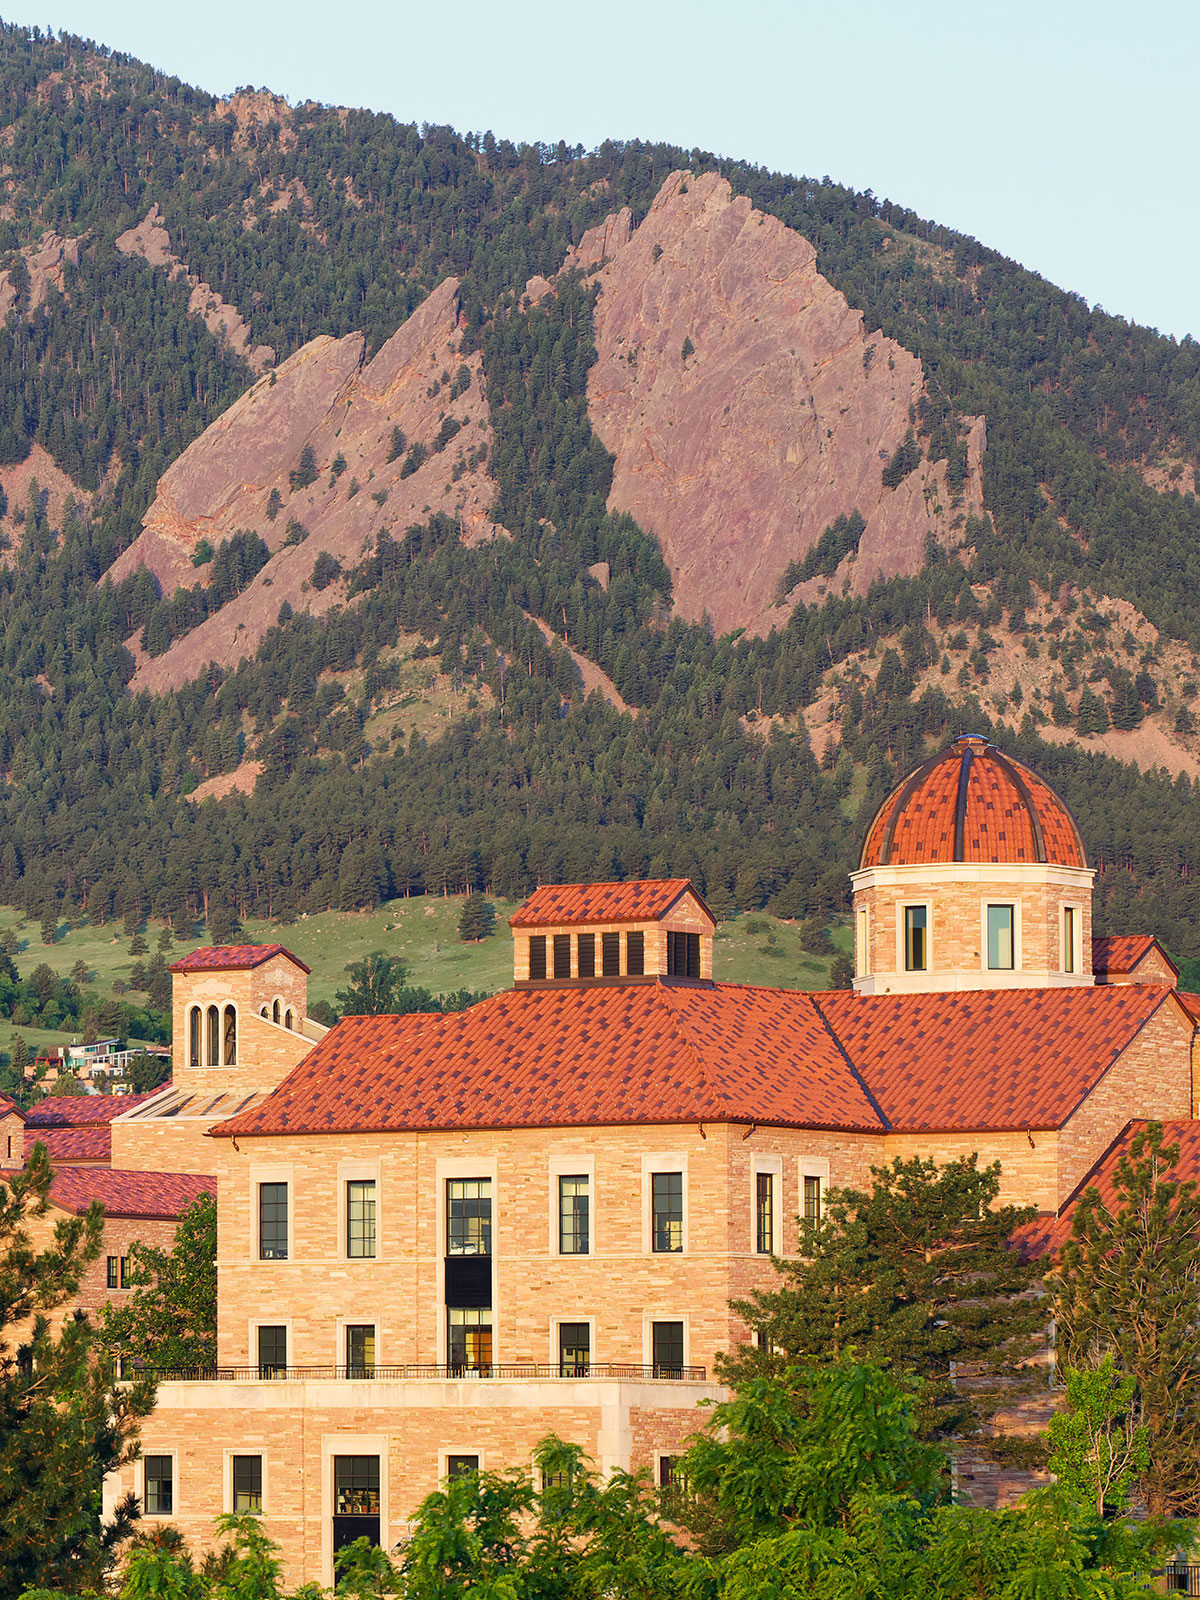 University of Colorado campus building with flatirons in background